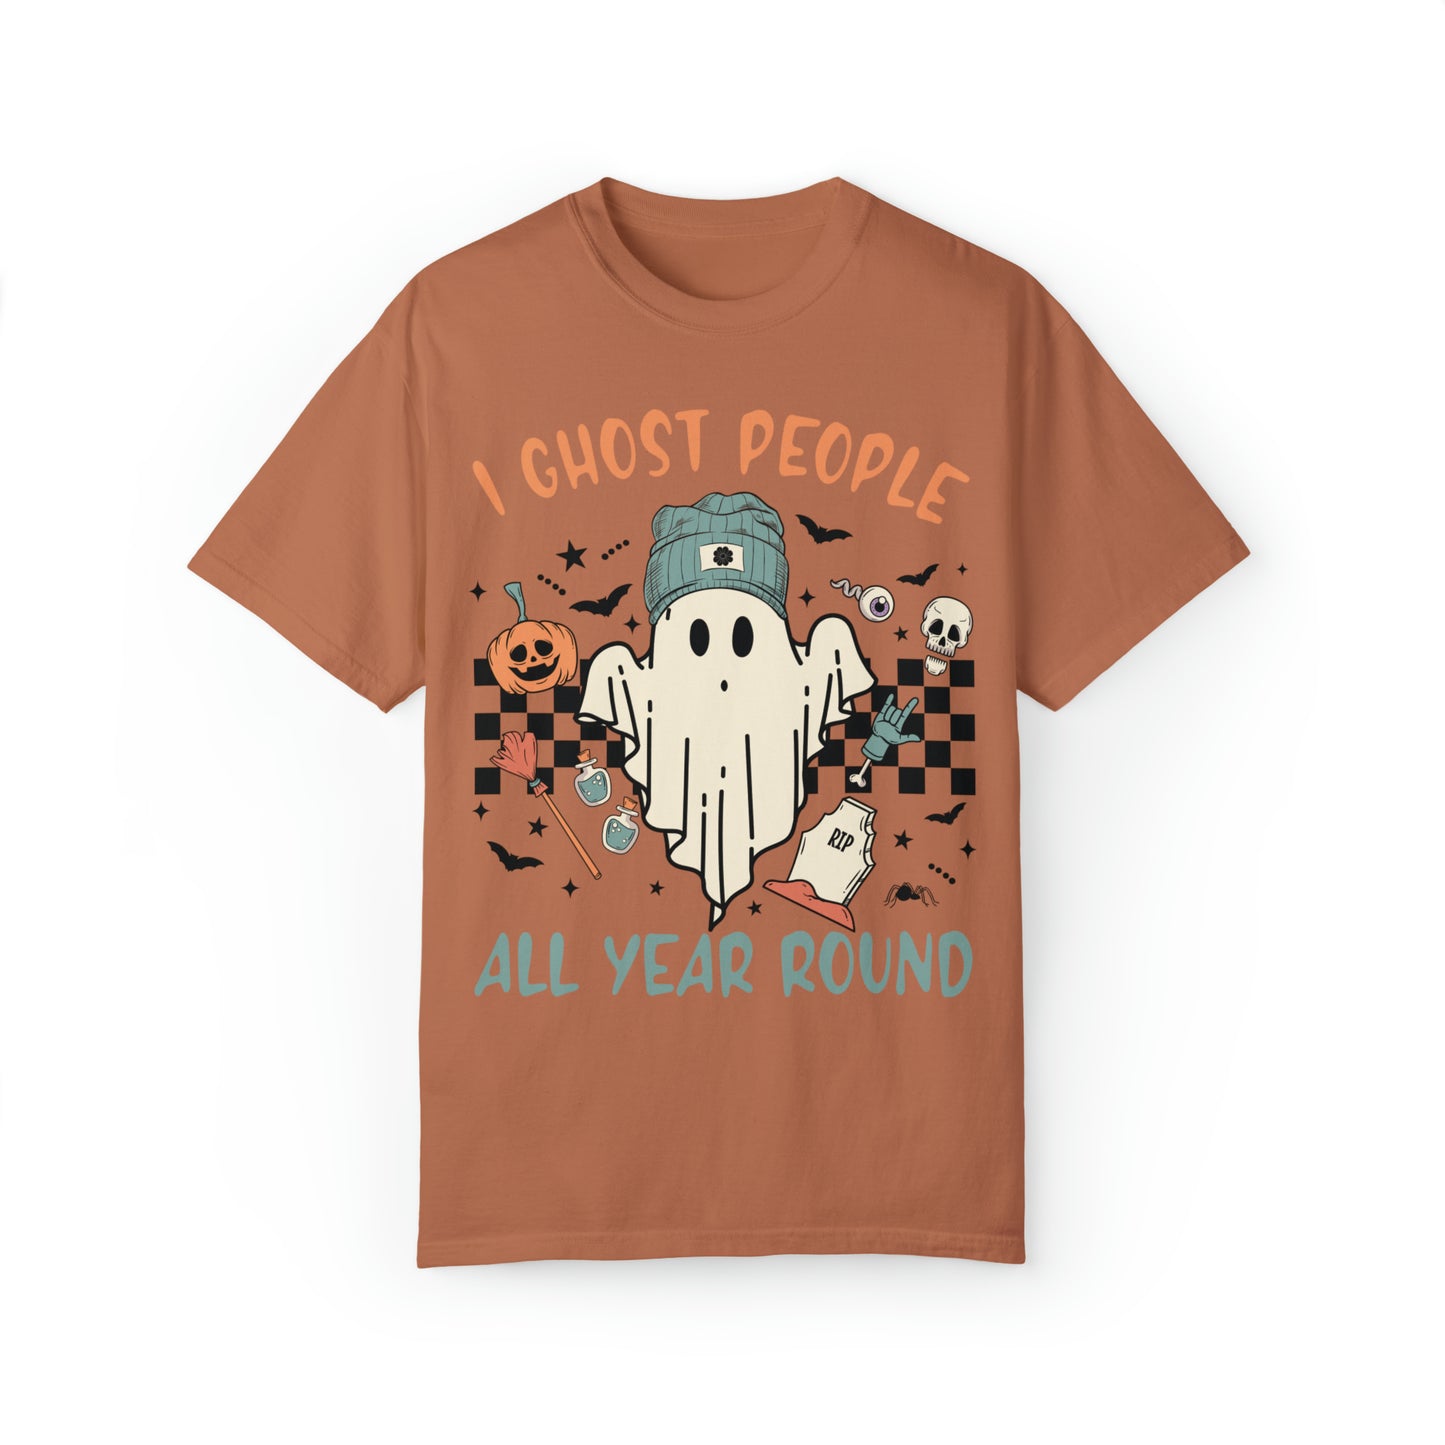 I Ghost people  Unisex Garment-Dyed T-shirt